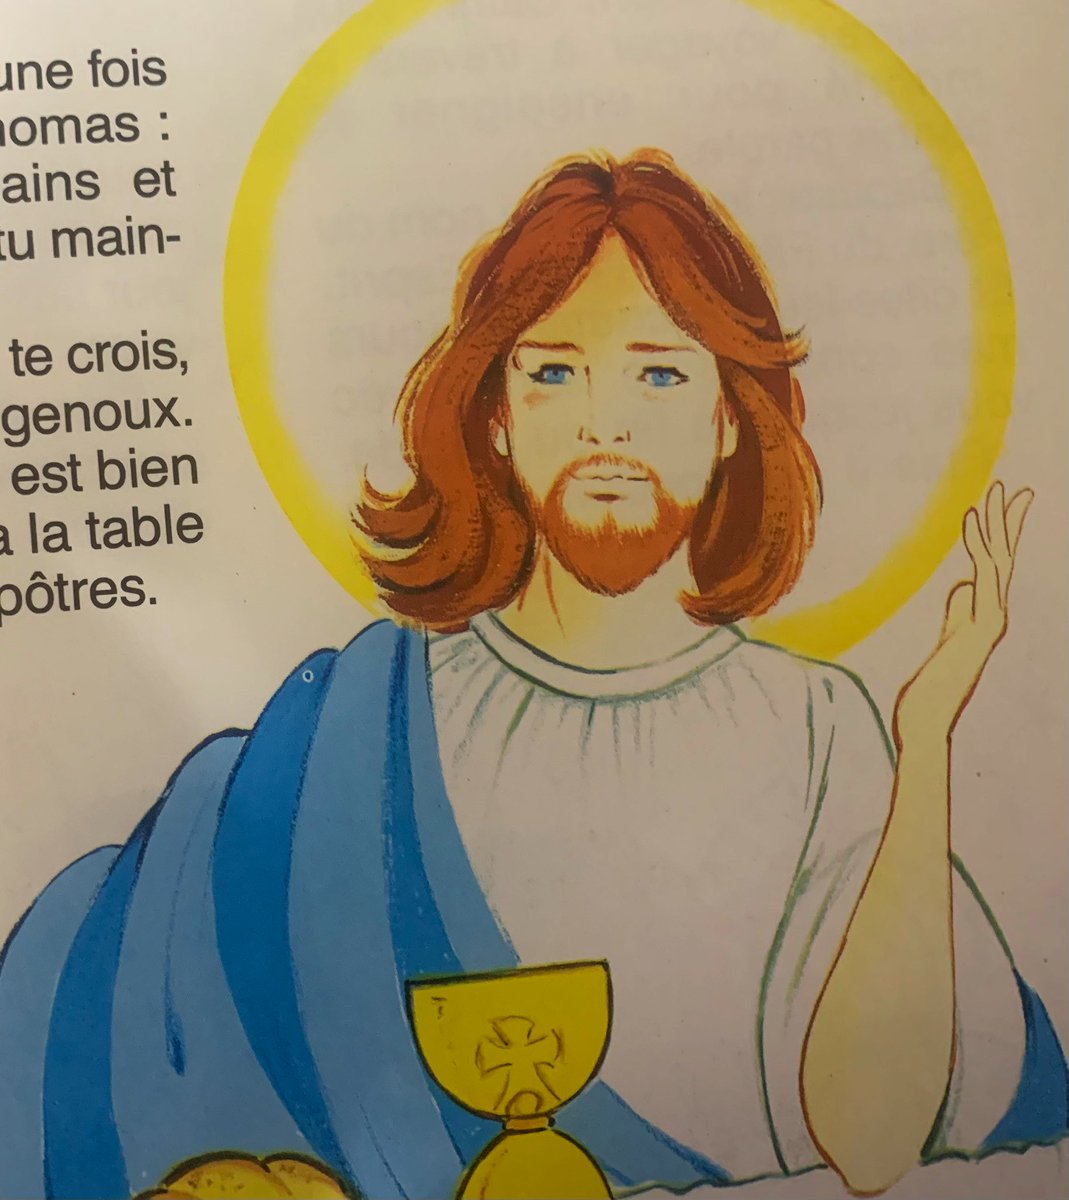 I was digging out old books and I found this « My First Bible » I got when I was a kid 😭😭😭😭😭😂😂😂
Literally every character looks like a doll smh and suddenly you have Jesus looking like Jared Leto